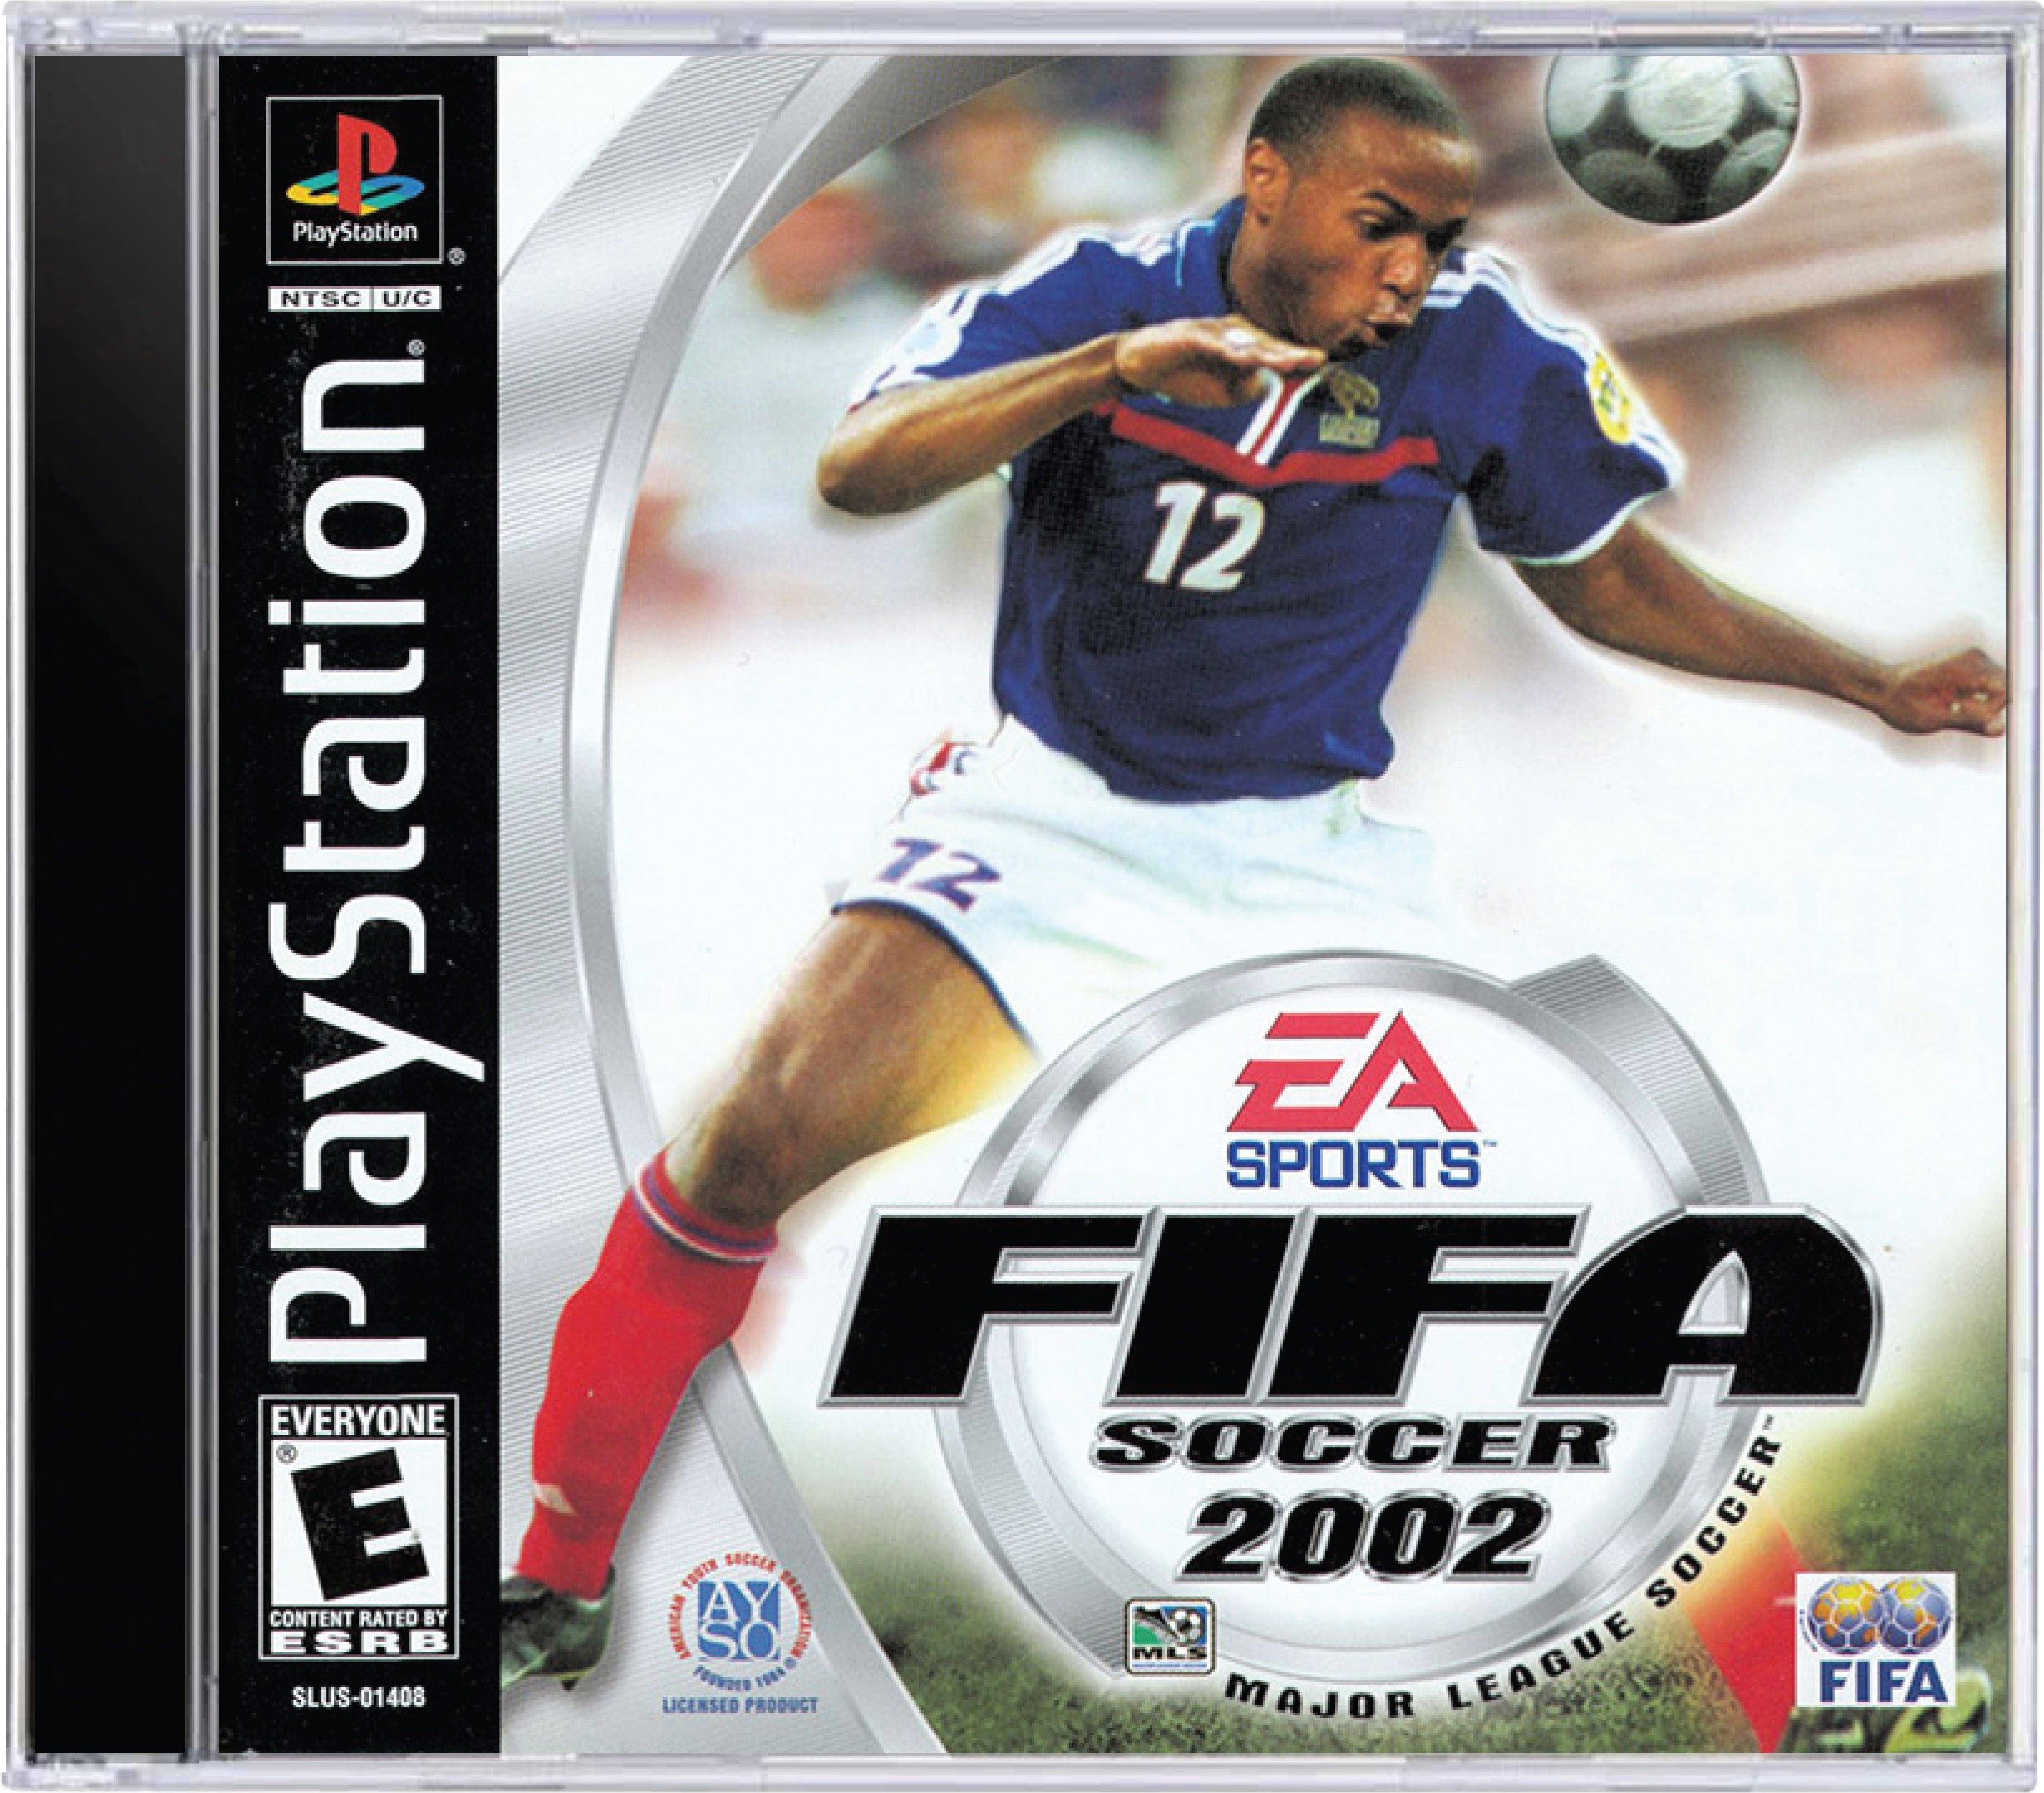 FIFA 2002 Cover Art and Product Photo